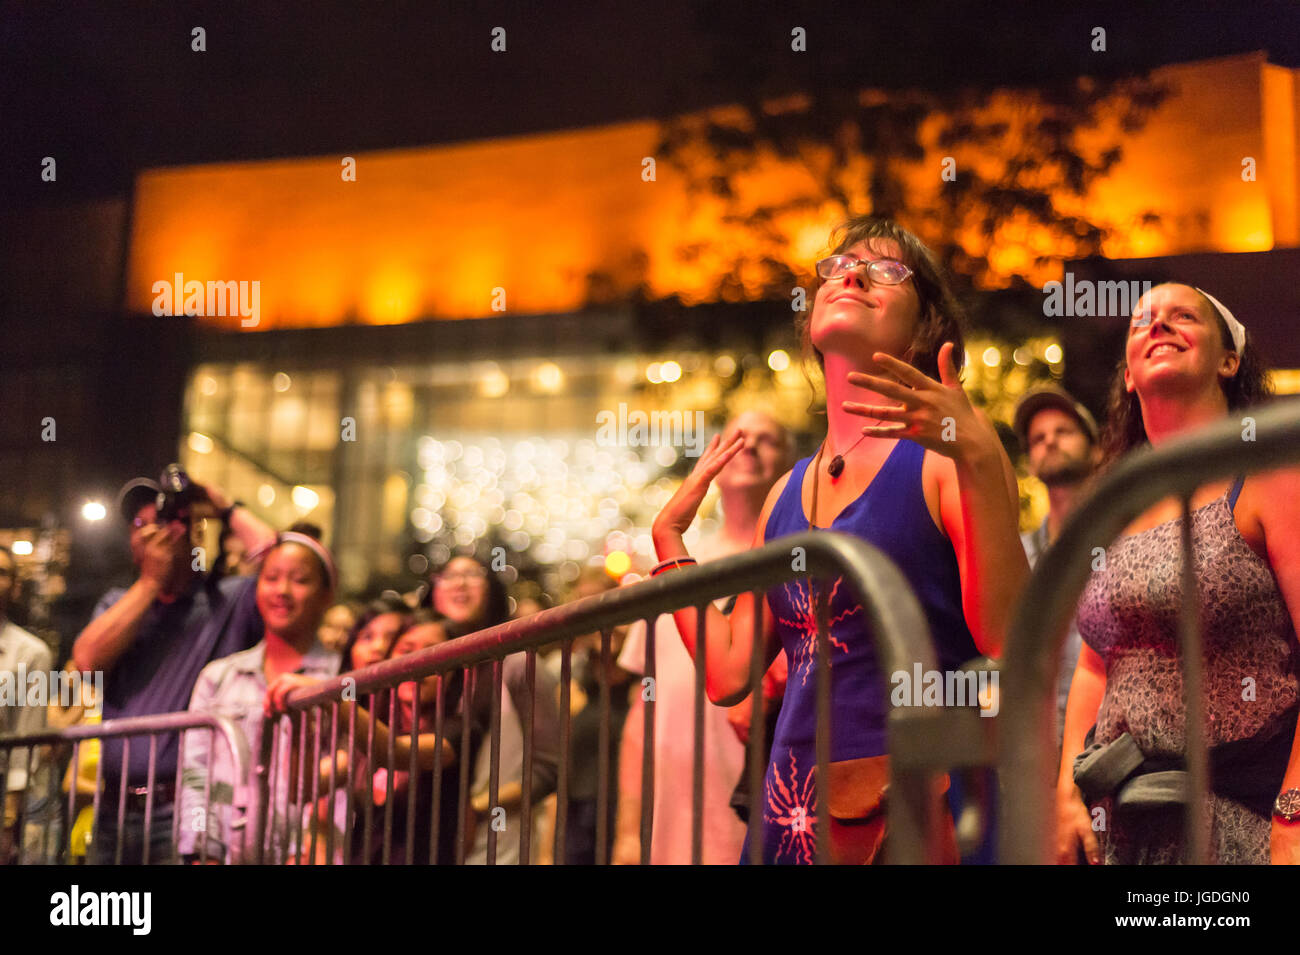 Montreal, 4 July 2017: Young woman in ecstasy at the end of  'Ghost Town Blues Band' performance at Montreal Jazz Festival Stock Photo